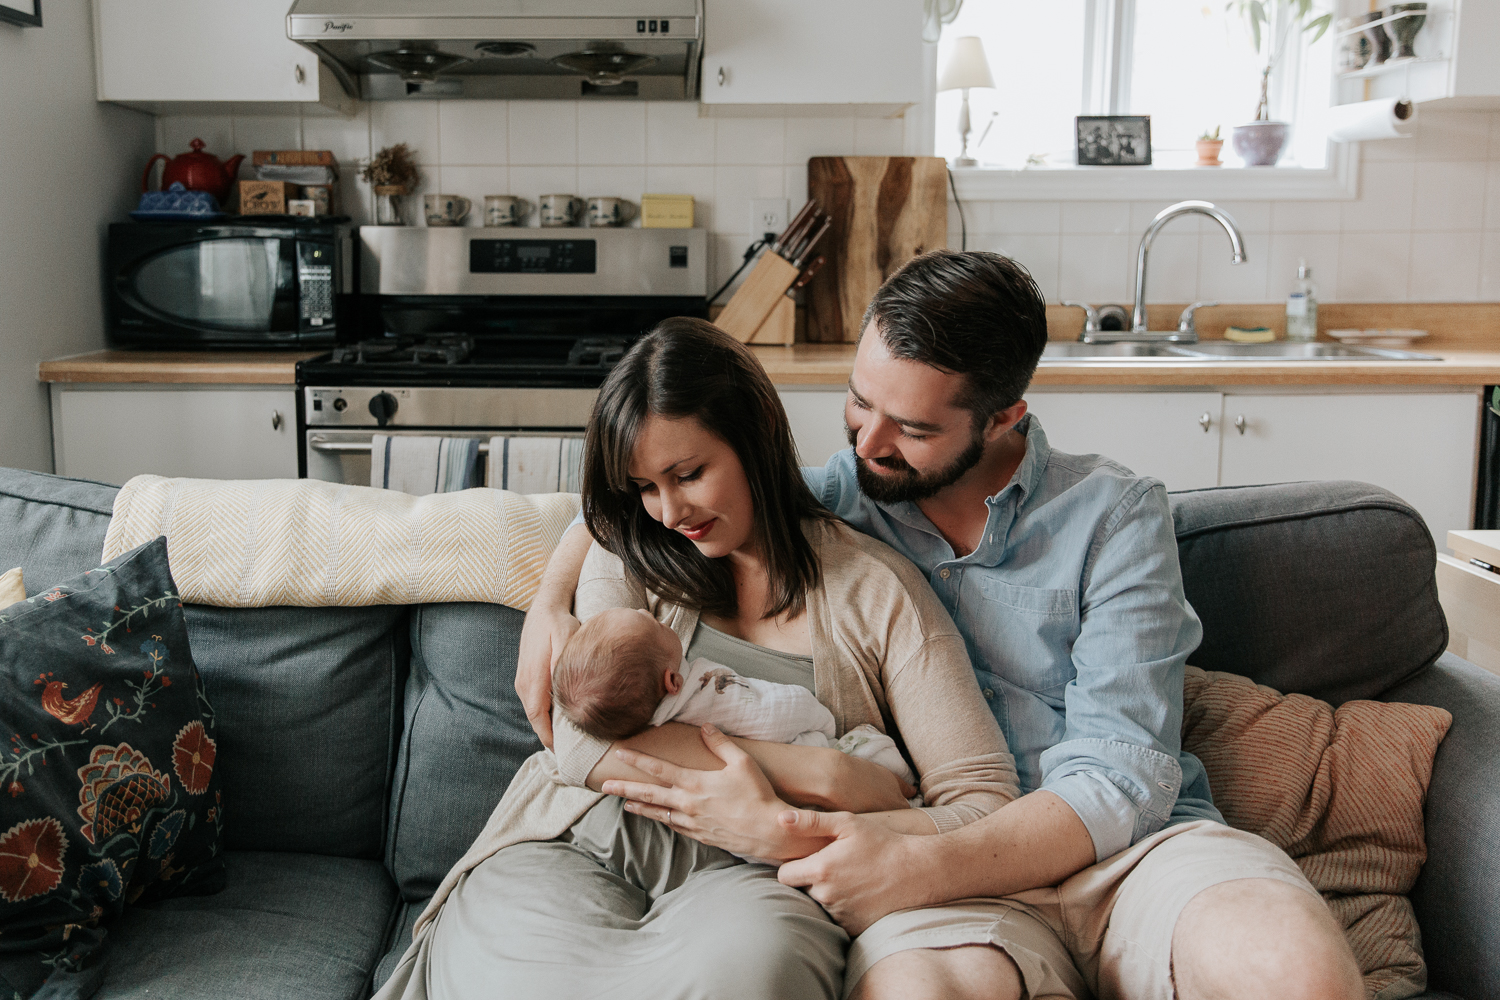 family of 3, new parents sitting on couch, mom holding 3 week old swaddled baby boy with red hair, dad with arm around mom looking at son - Stouffville Lifestyle Photos